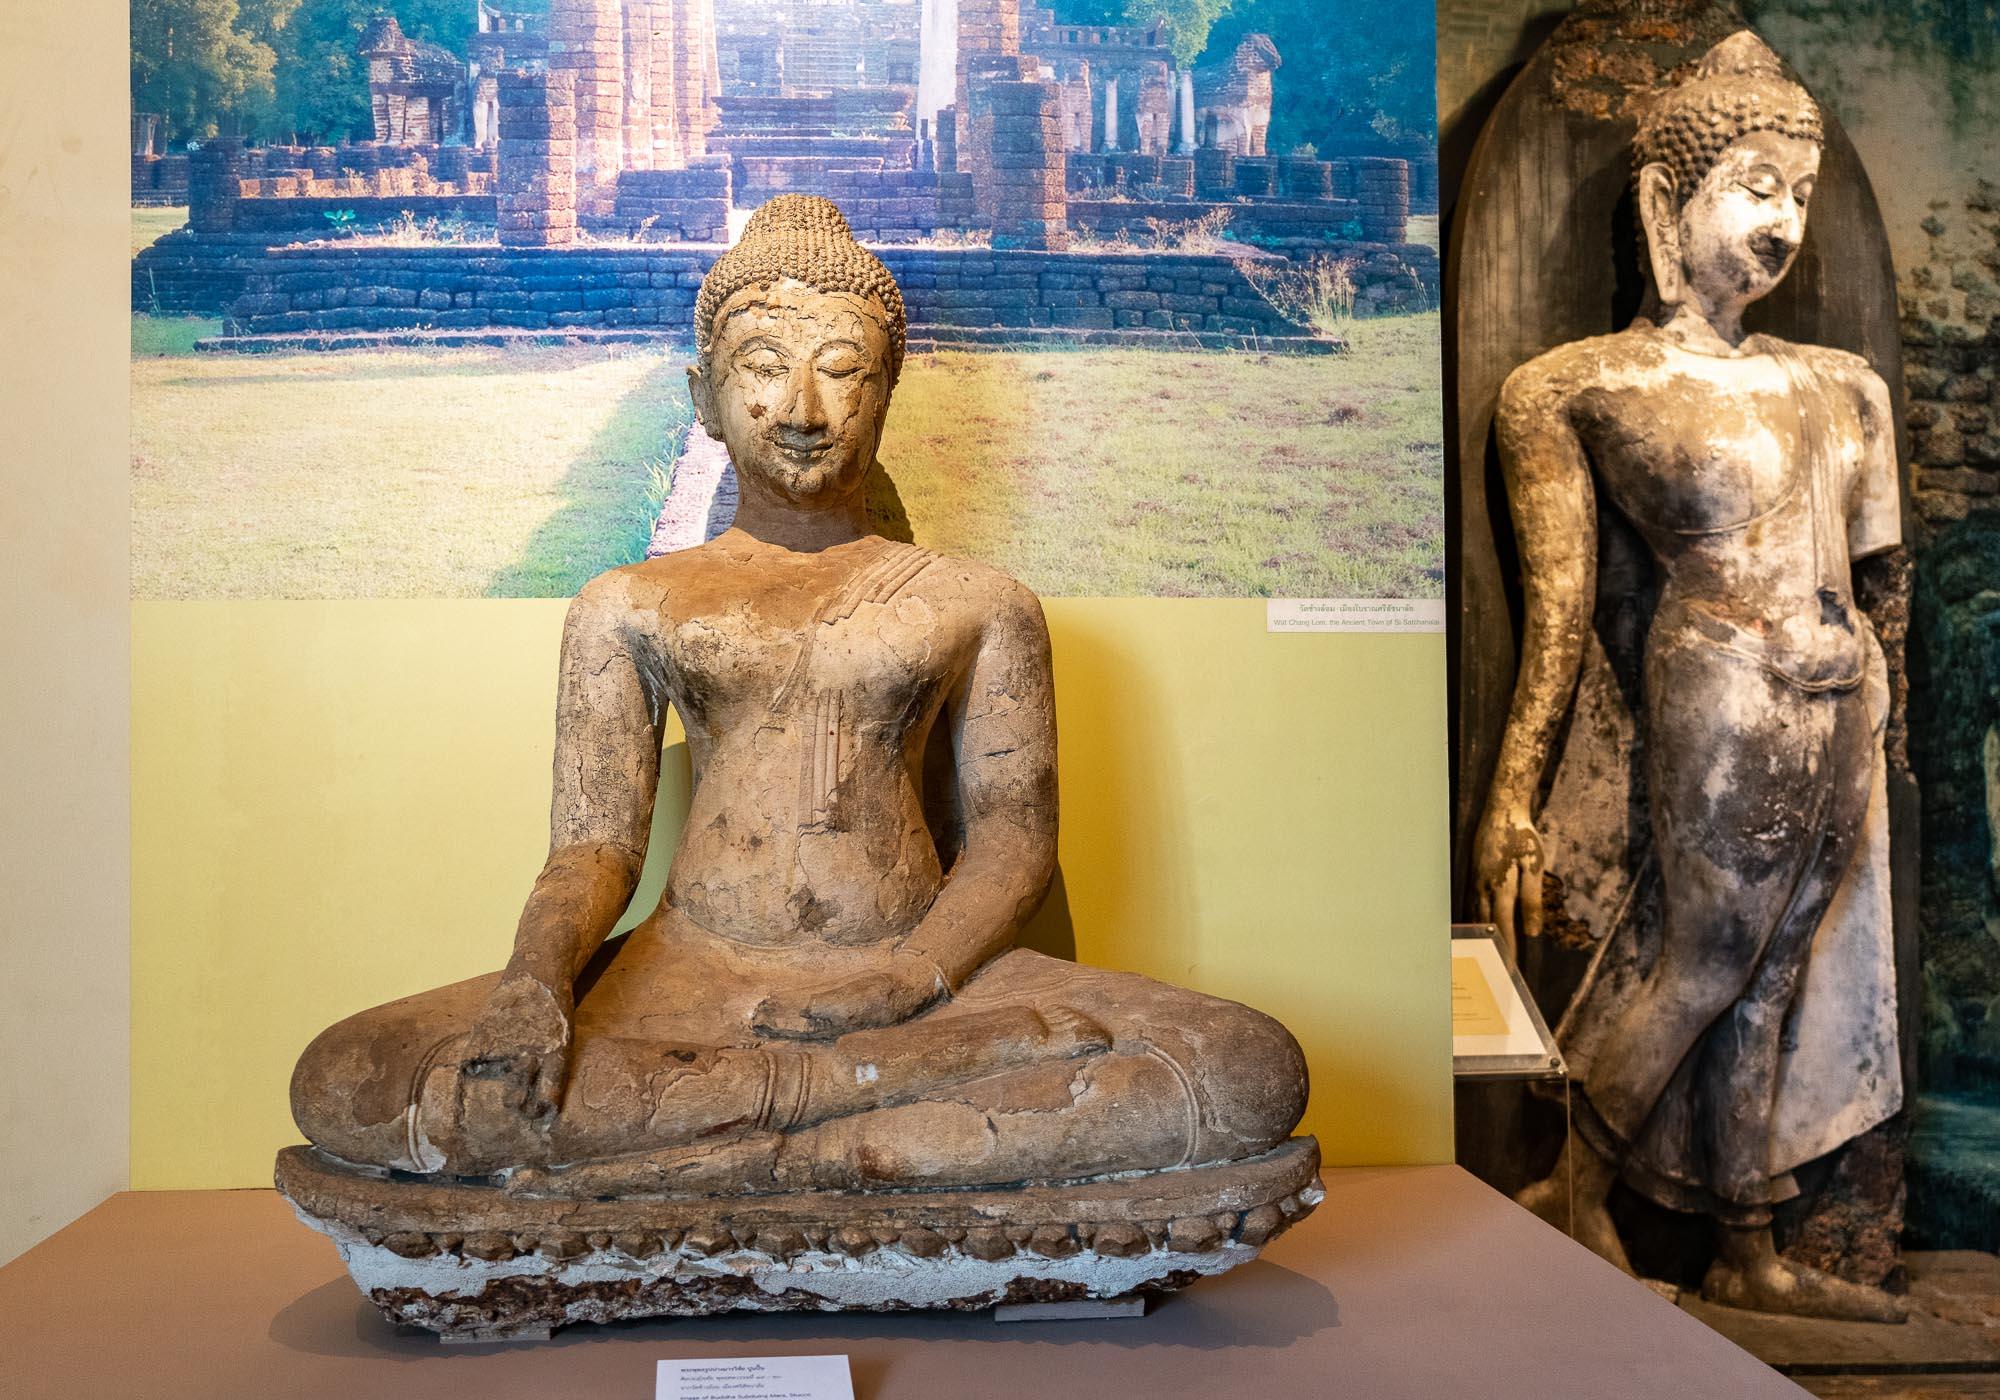 A stucco statue of Buddha subduing Mara from the 14th-15th century that was found in Si Satchanalai. – © Michael Turtle